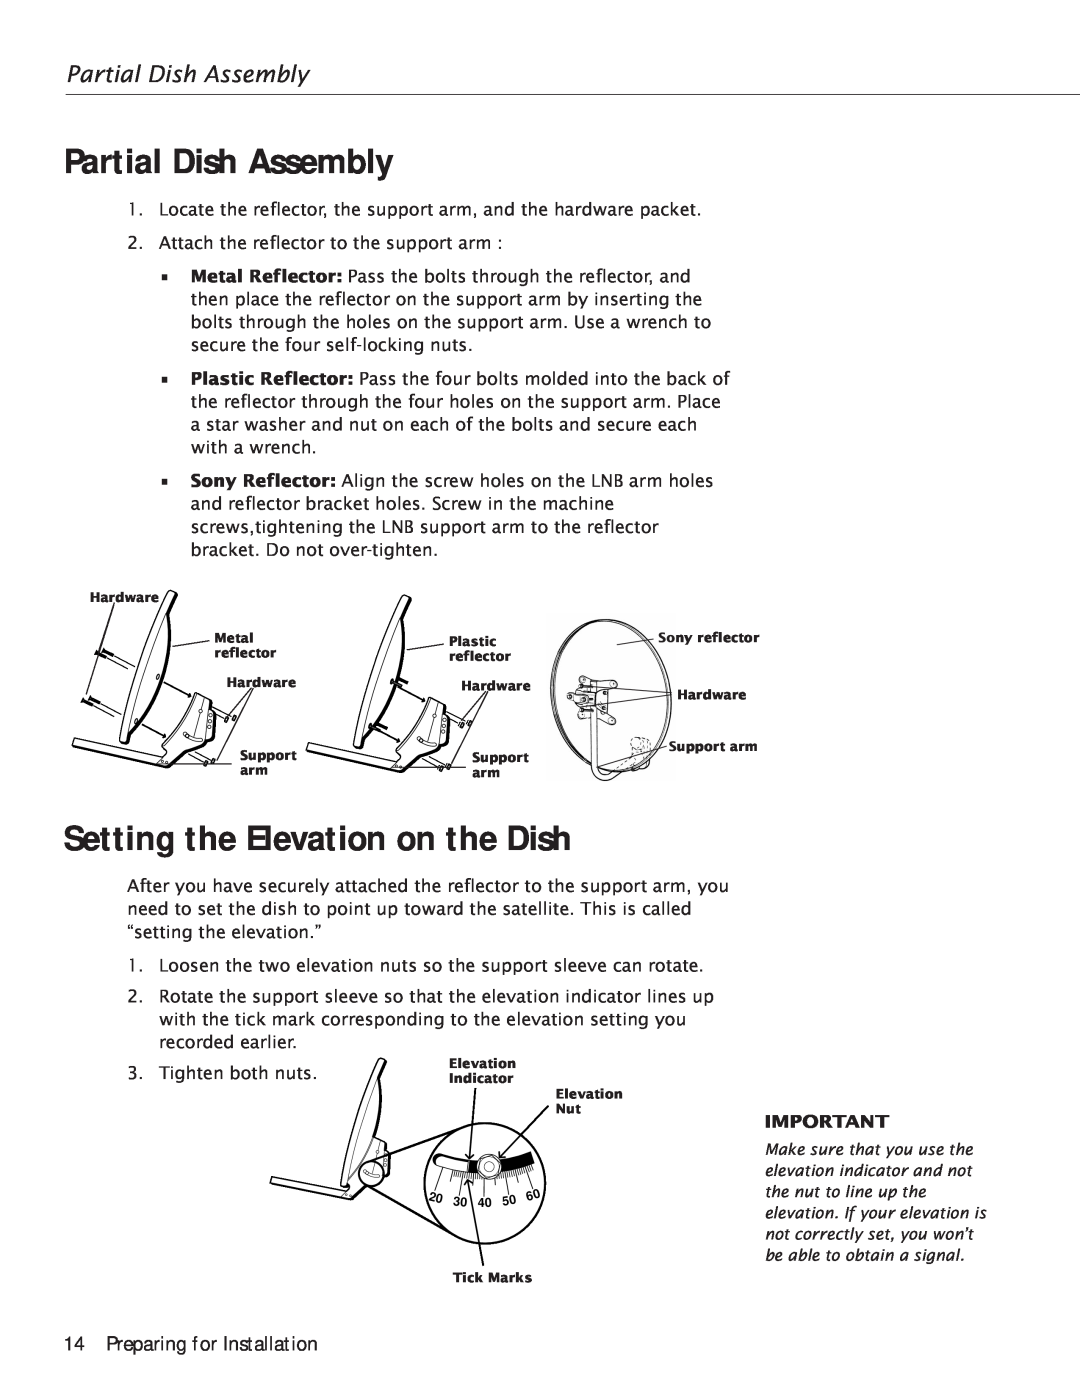 RCA Satellite TV Antenna manual Partial Dish Assembly, Setting the Elevation on the Dish, Preparing for Installation 